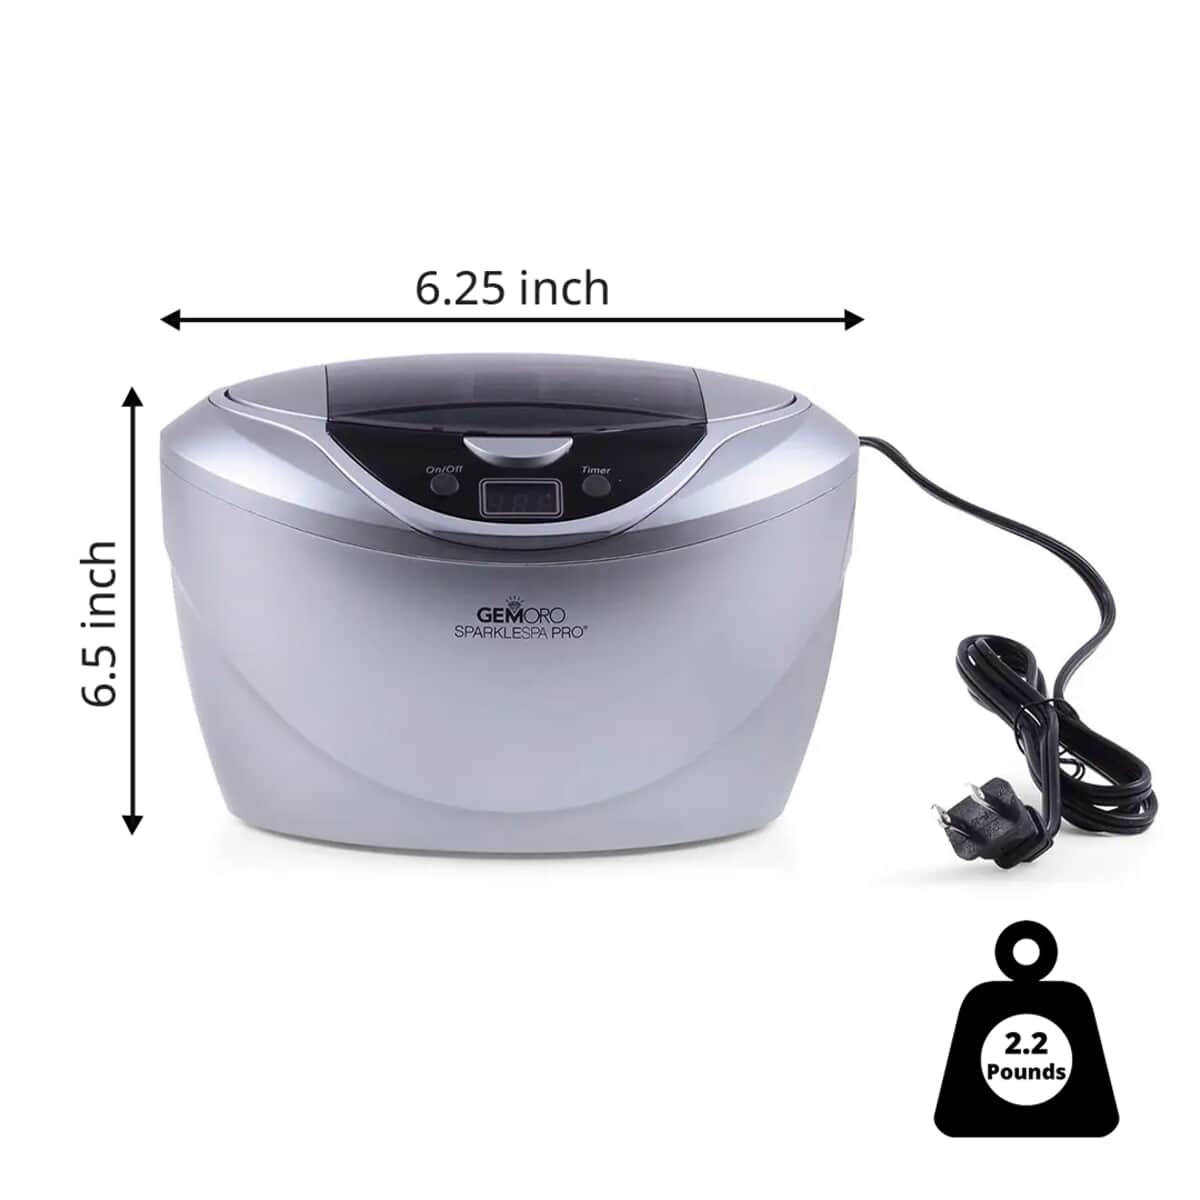 Gemoro Sparkle Spa Pro: Deluxe Personal Ultrasonic Jewelry Cleaner - Grey image number 5